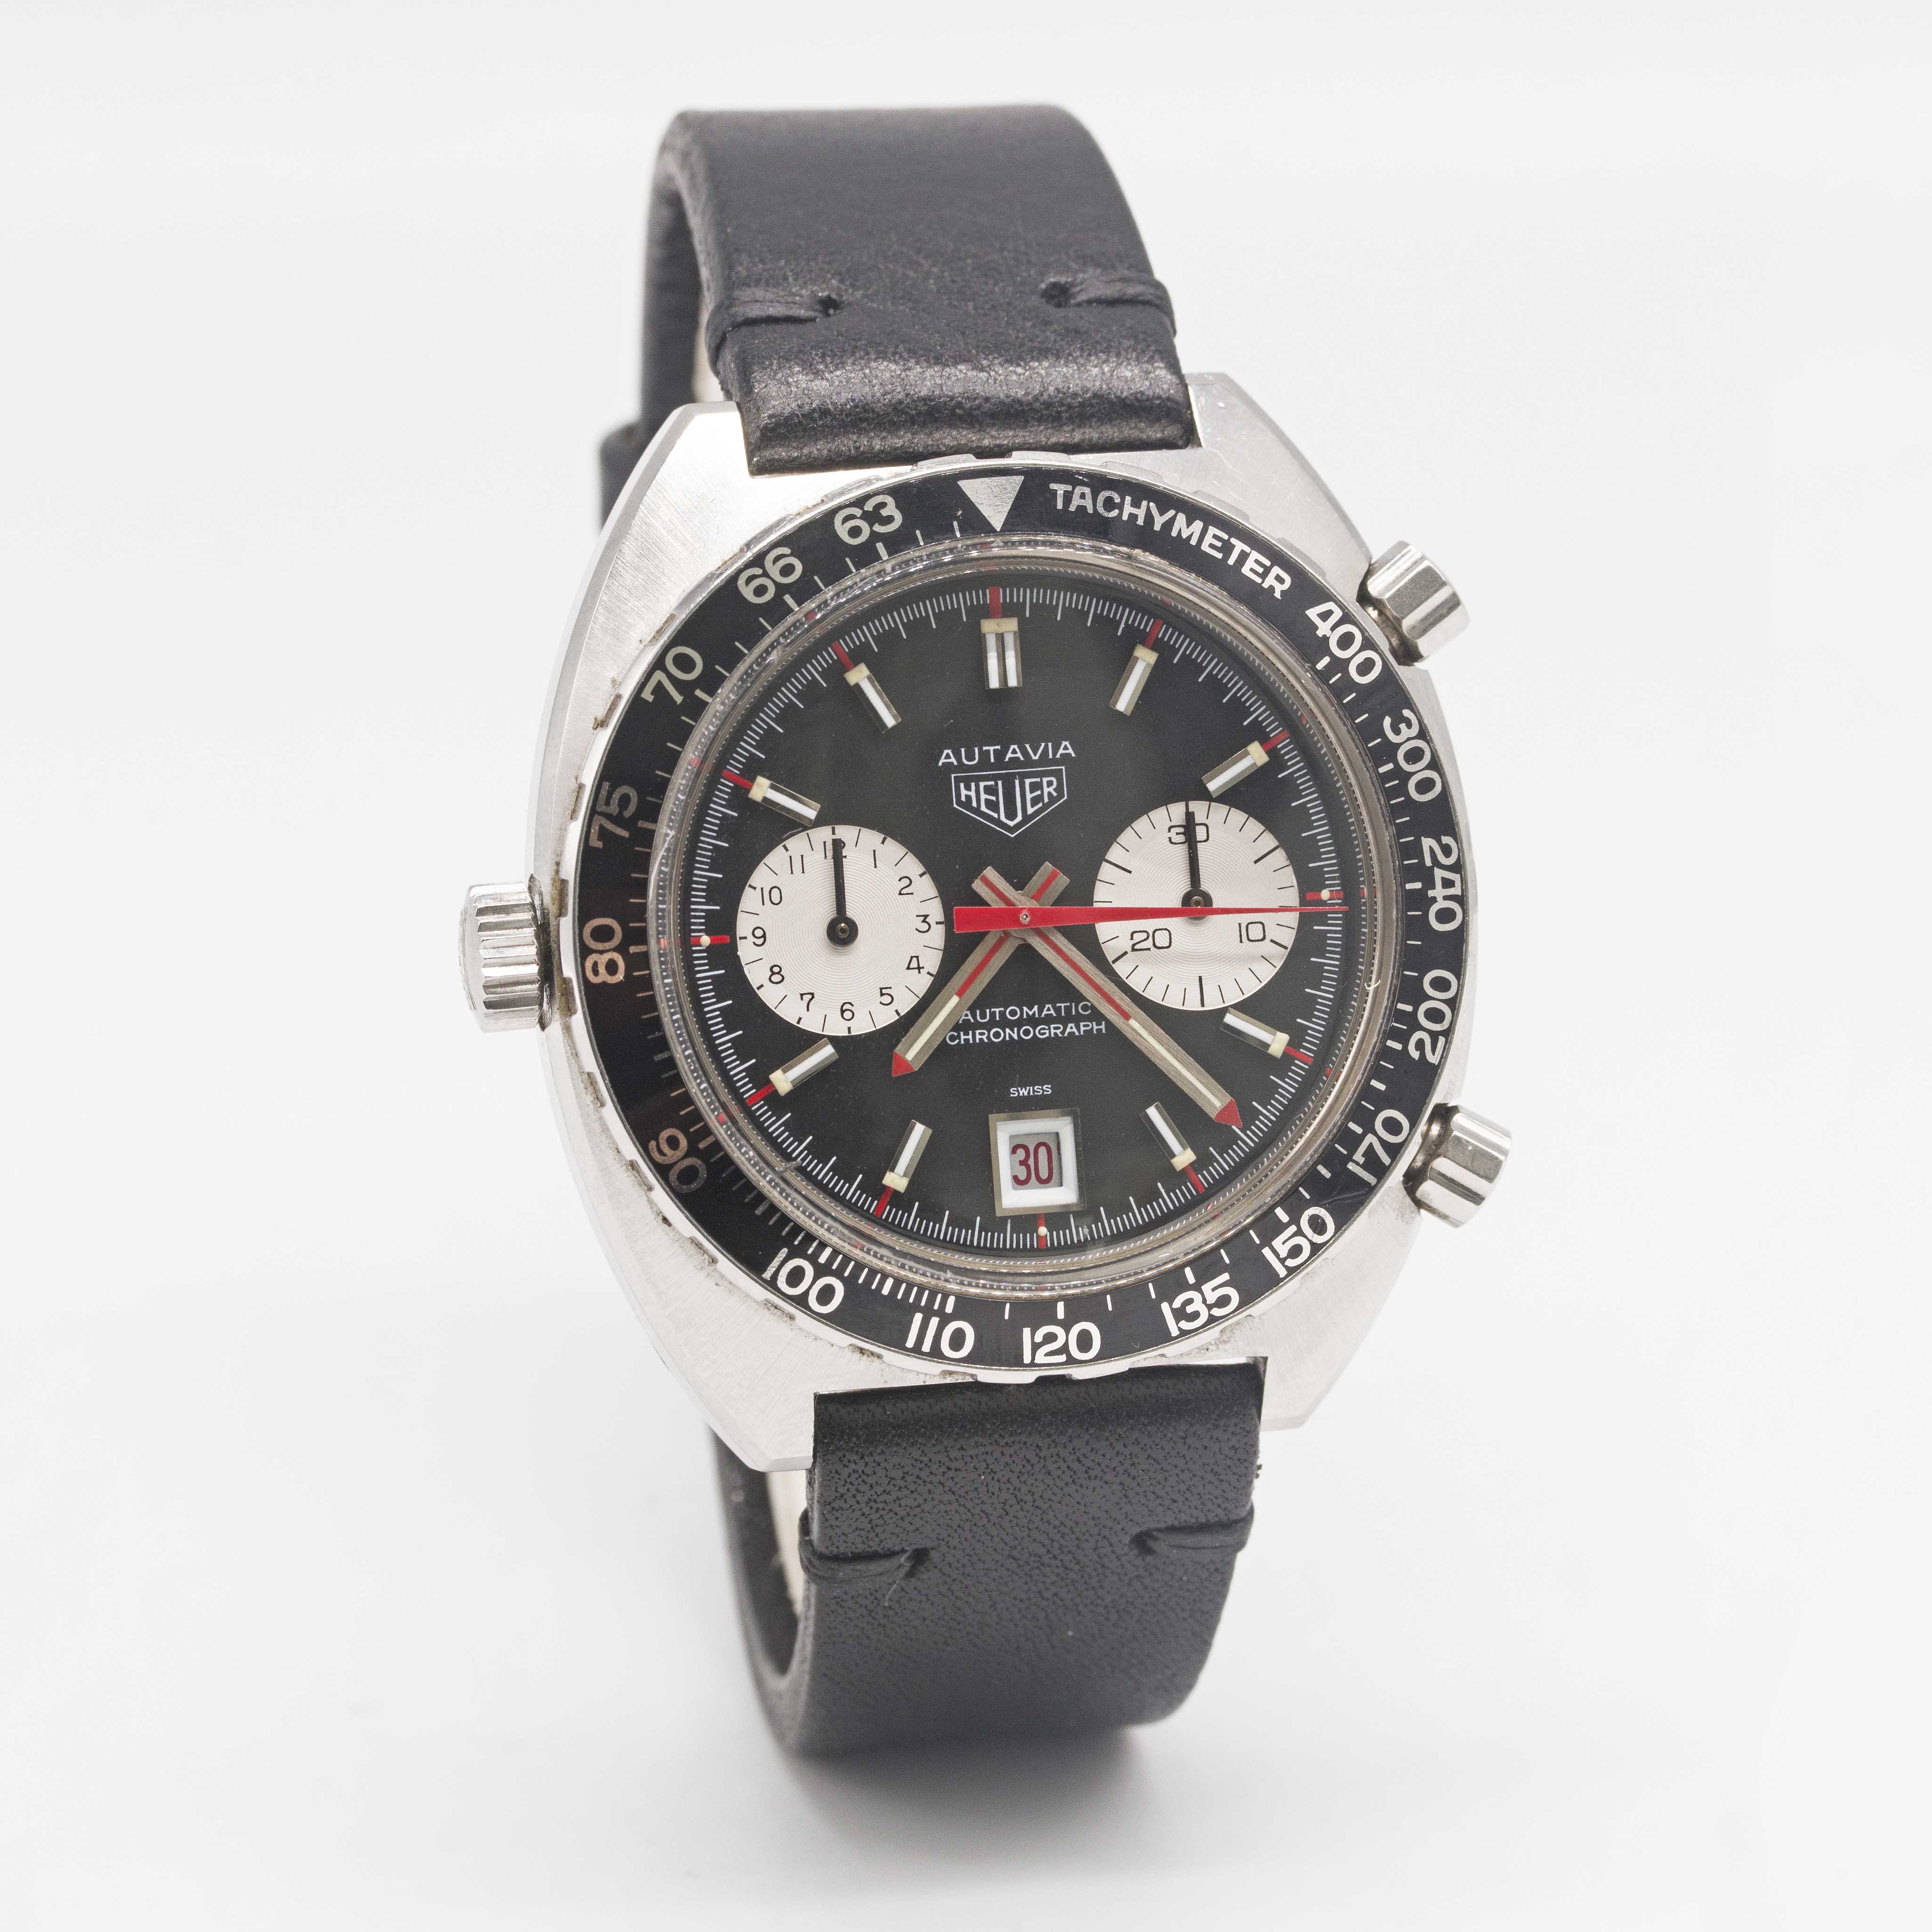 A GENTLEMAN'S STAINLESS STEEL HEUER "VICEROY" AUTAVIA CHRONOGRAPH WRIST WATCH CIRCA 1970s, REF. - Image 4 of 8